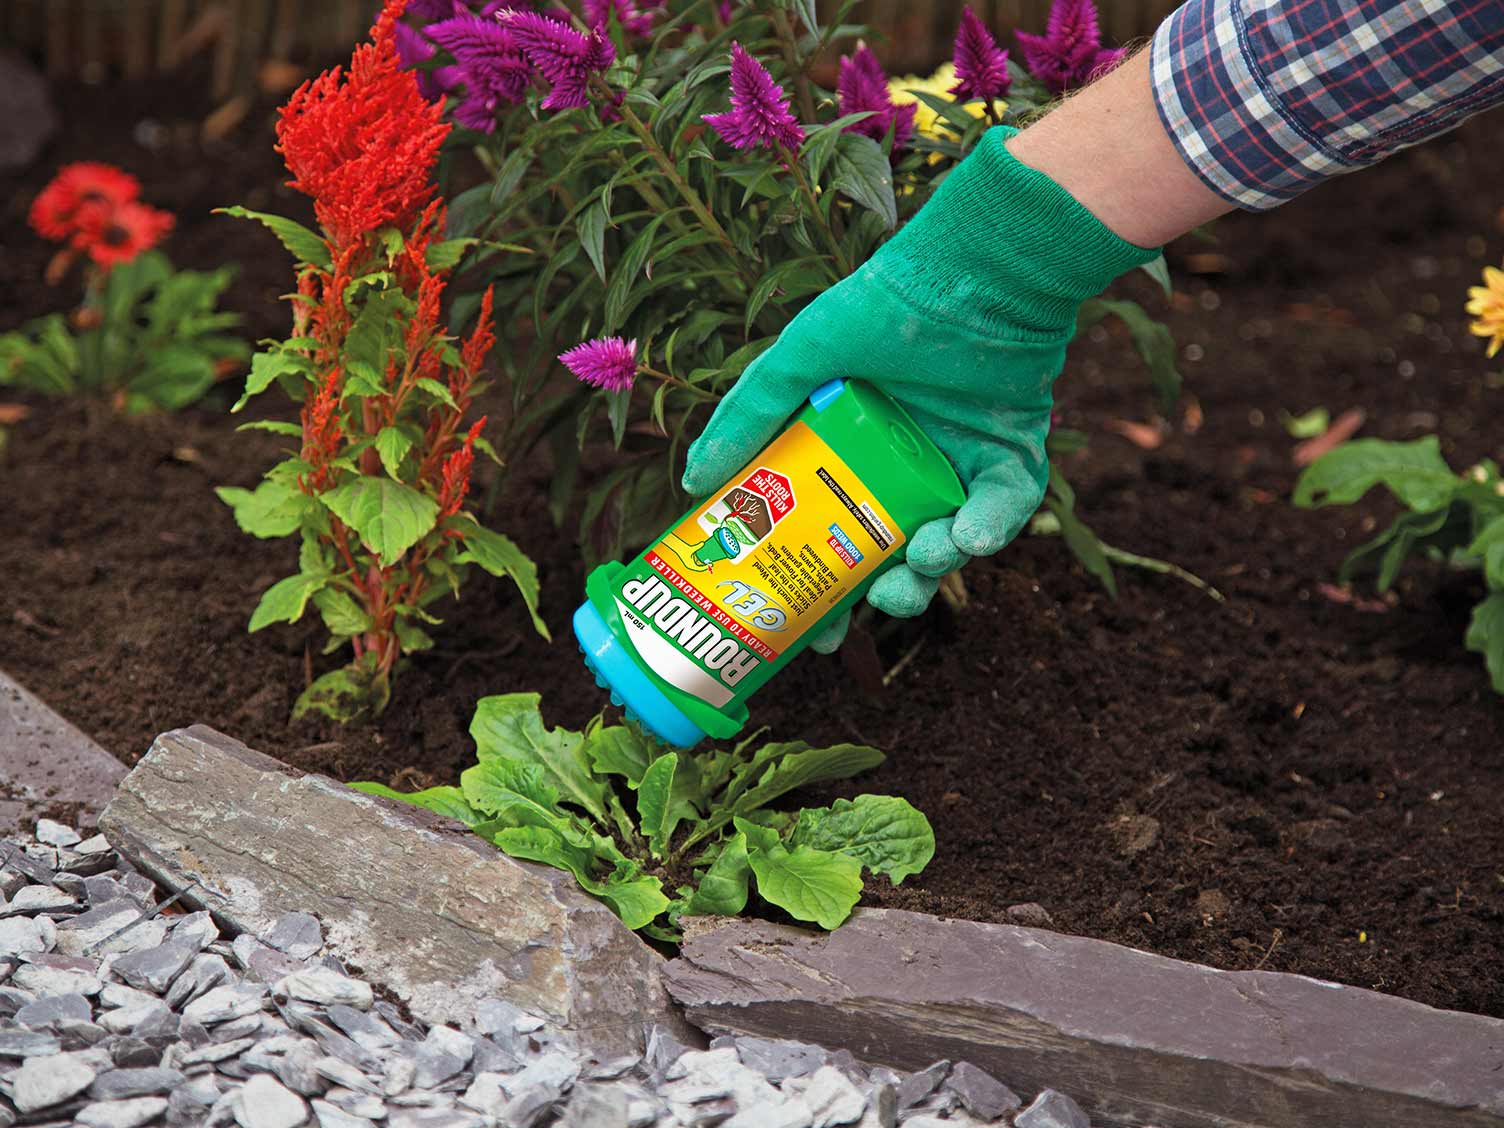 How to prevent weeds from growing in your flower bed